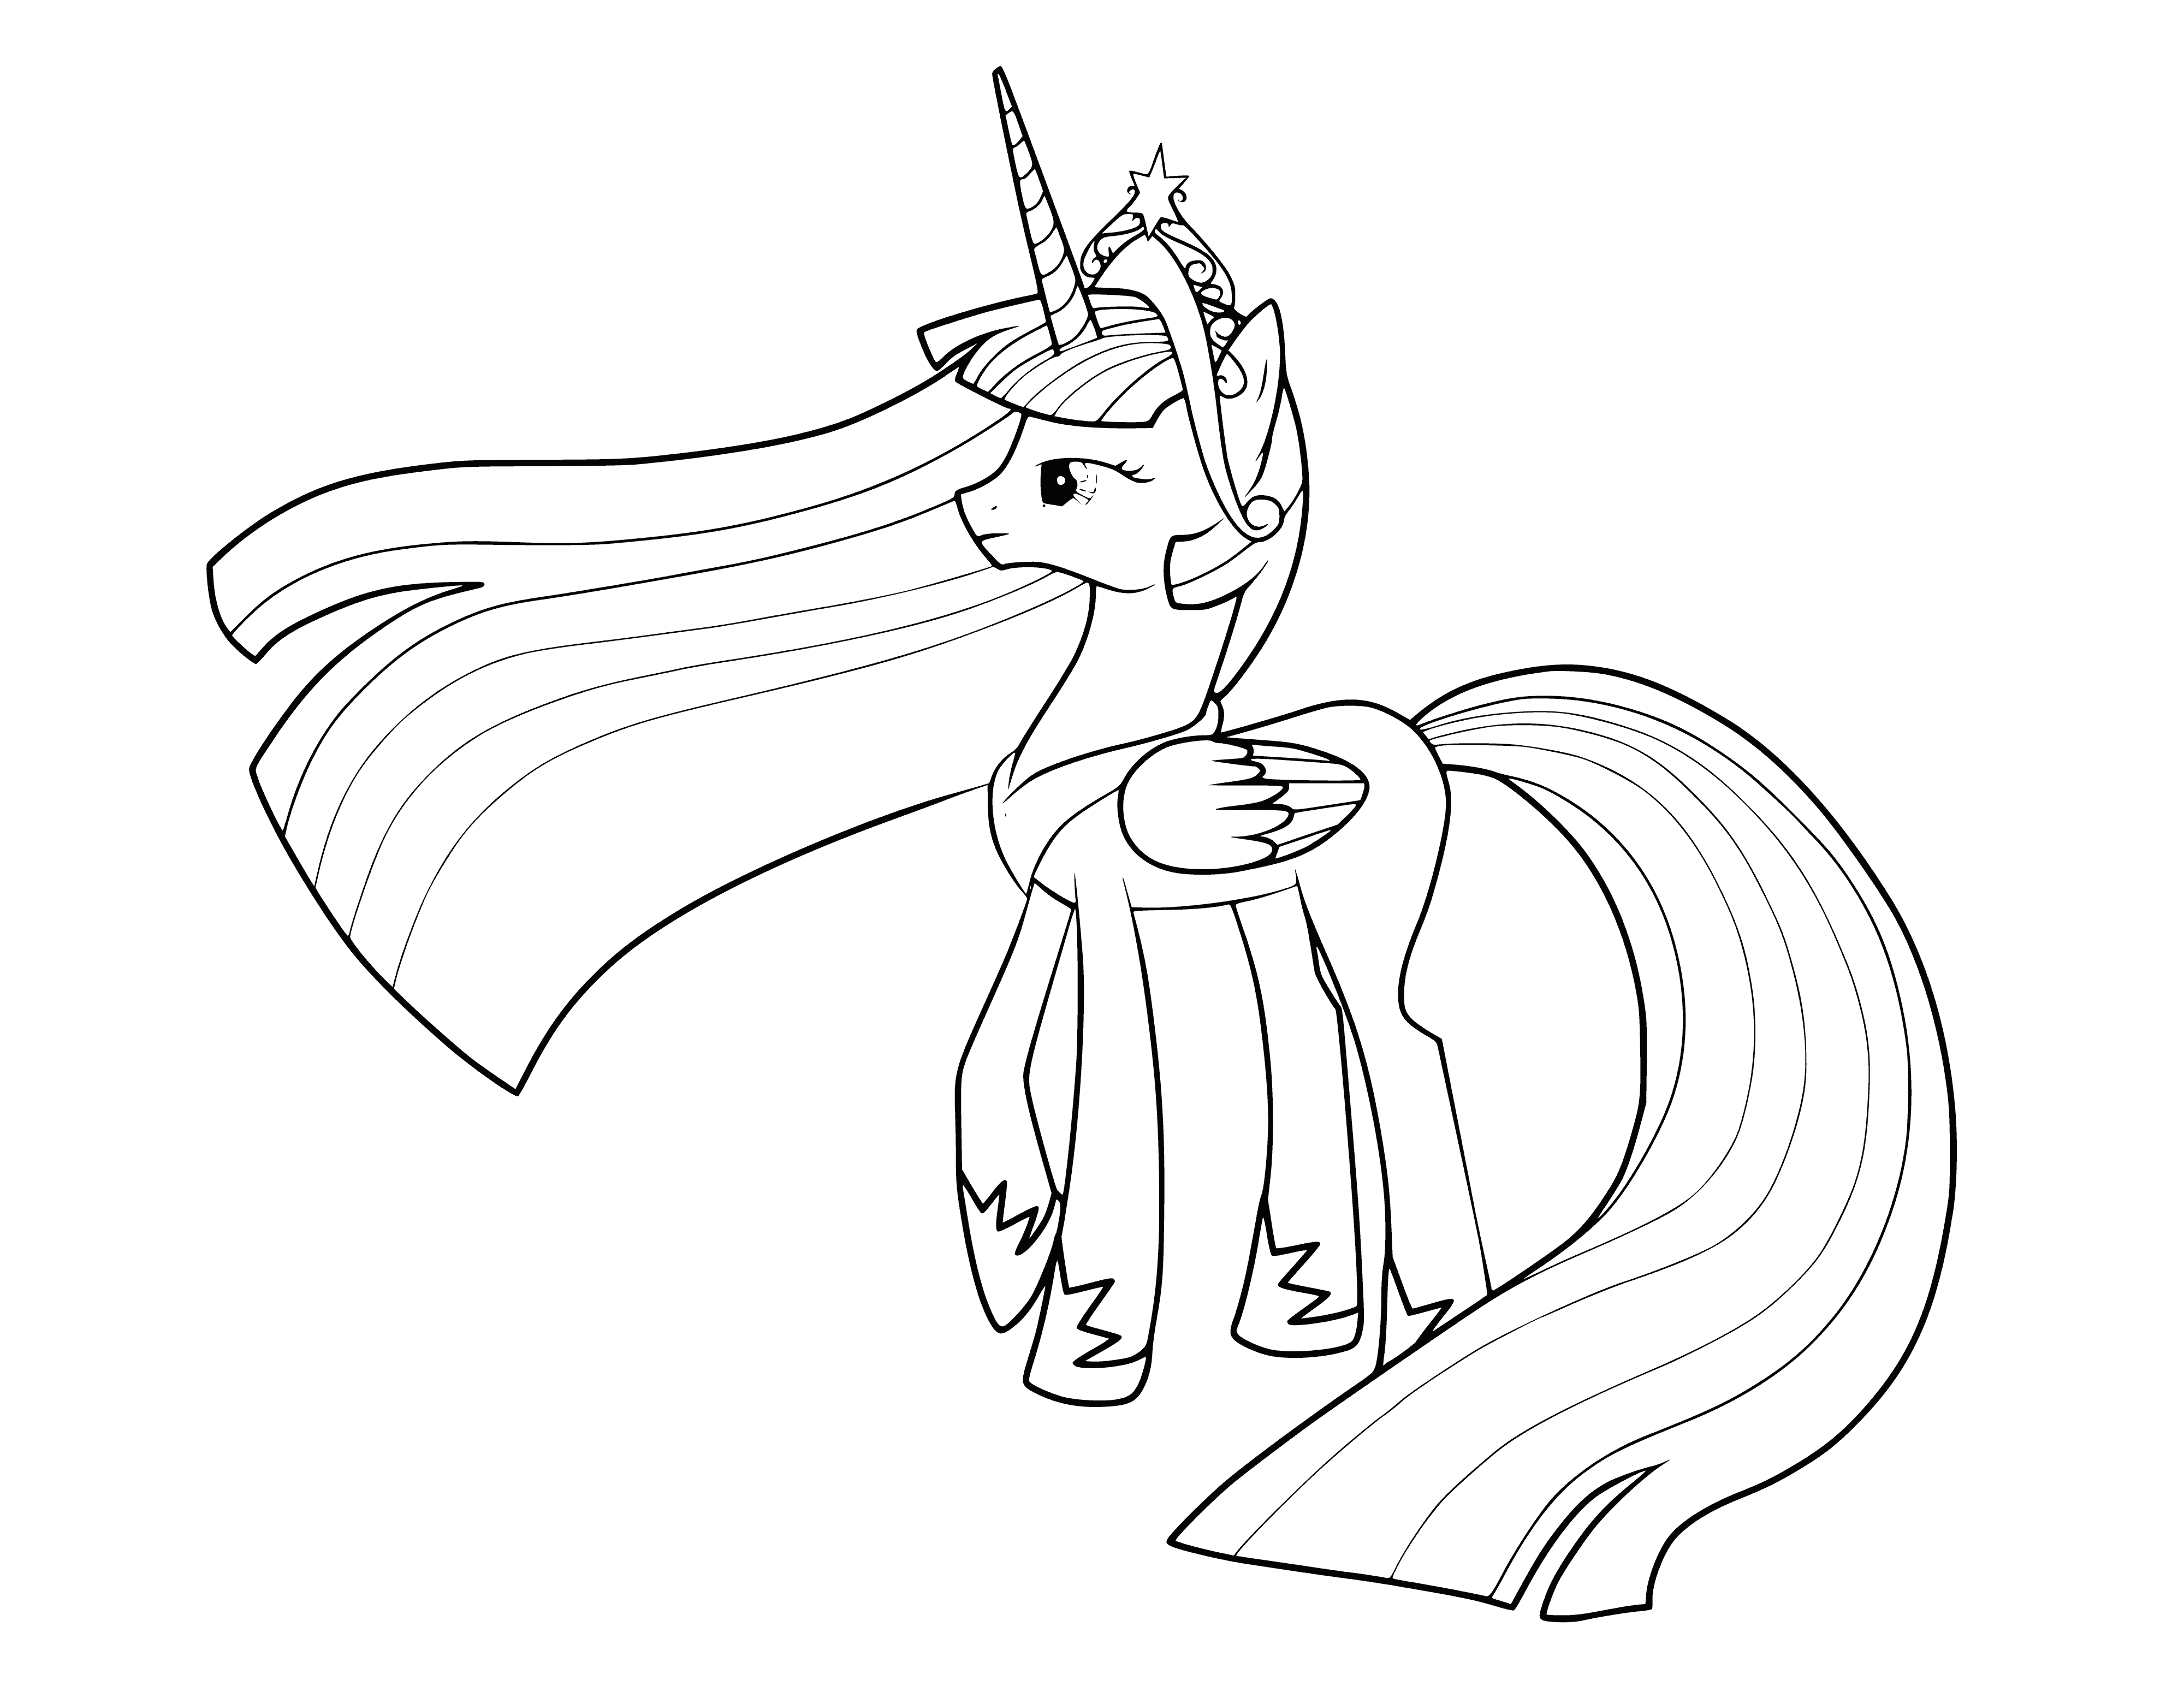 coloring page: Princess Celestia is a magical alicorn who raises the sun each day with her regal grace.